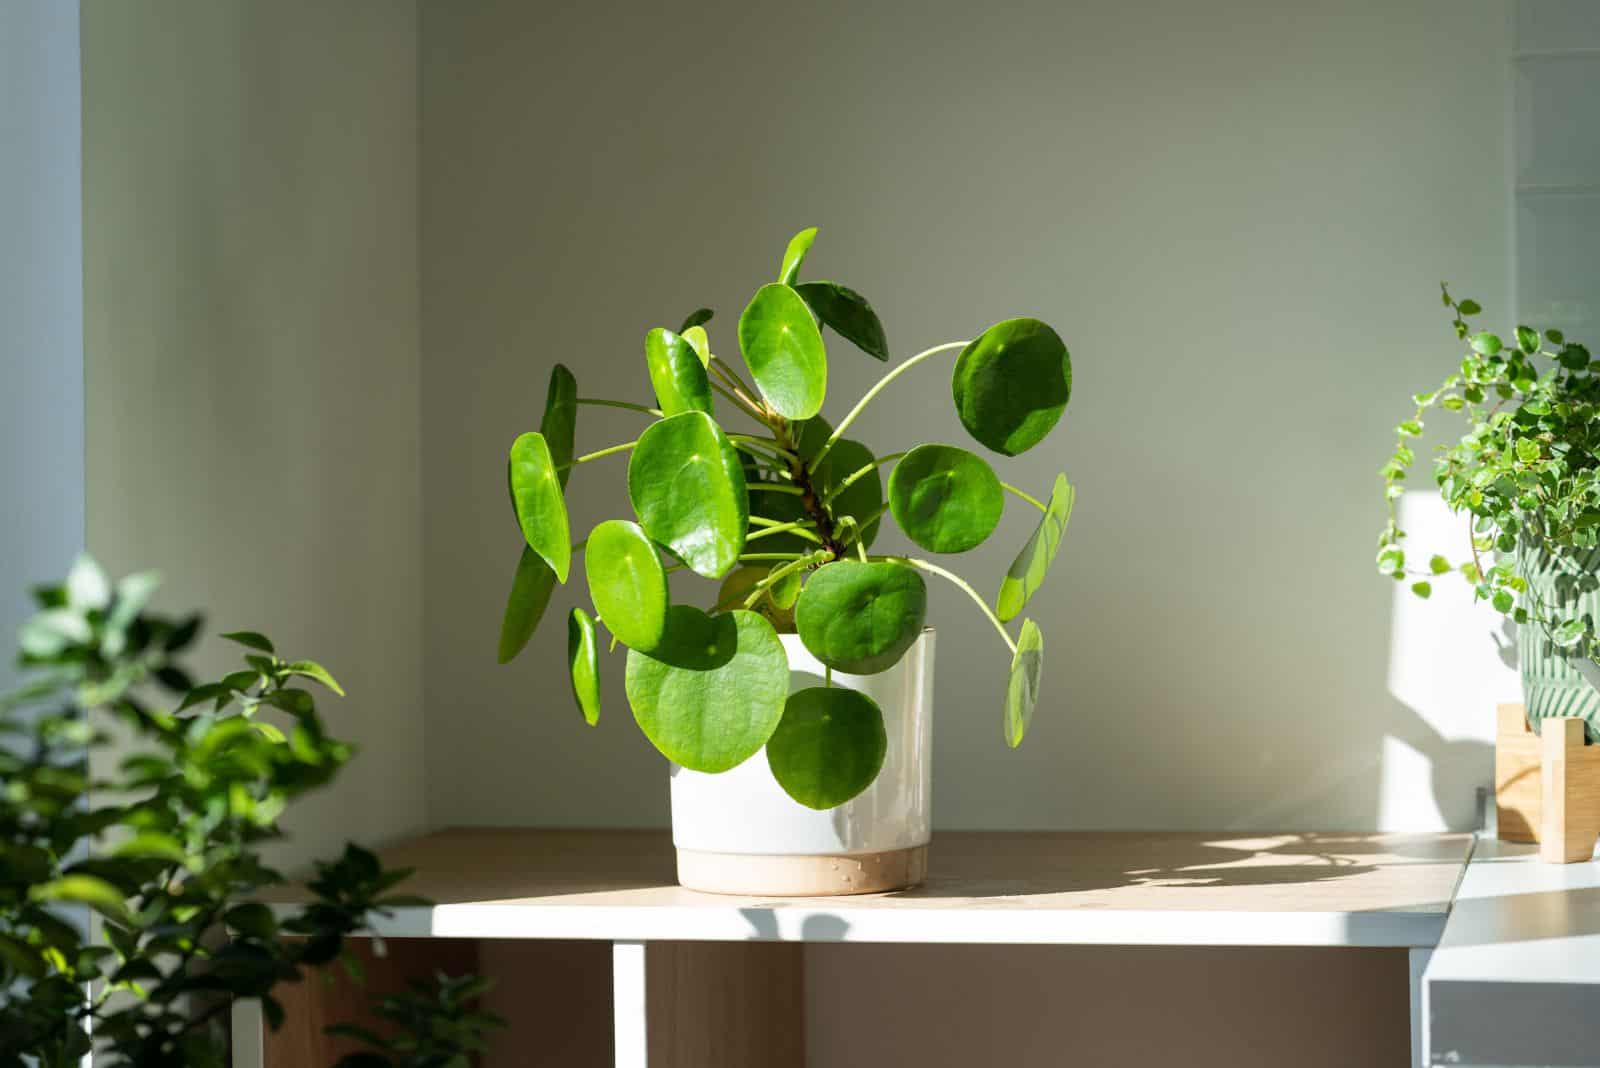 Chinese Money Plant in a white pot on the table